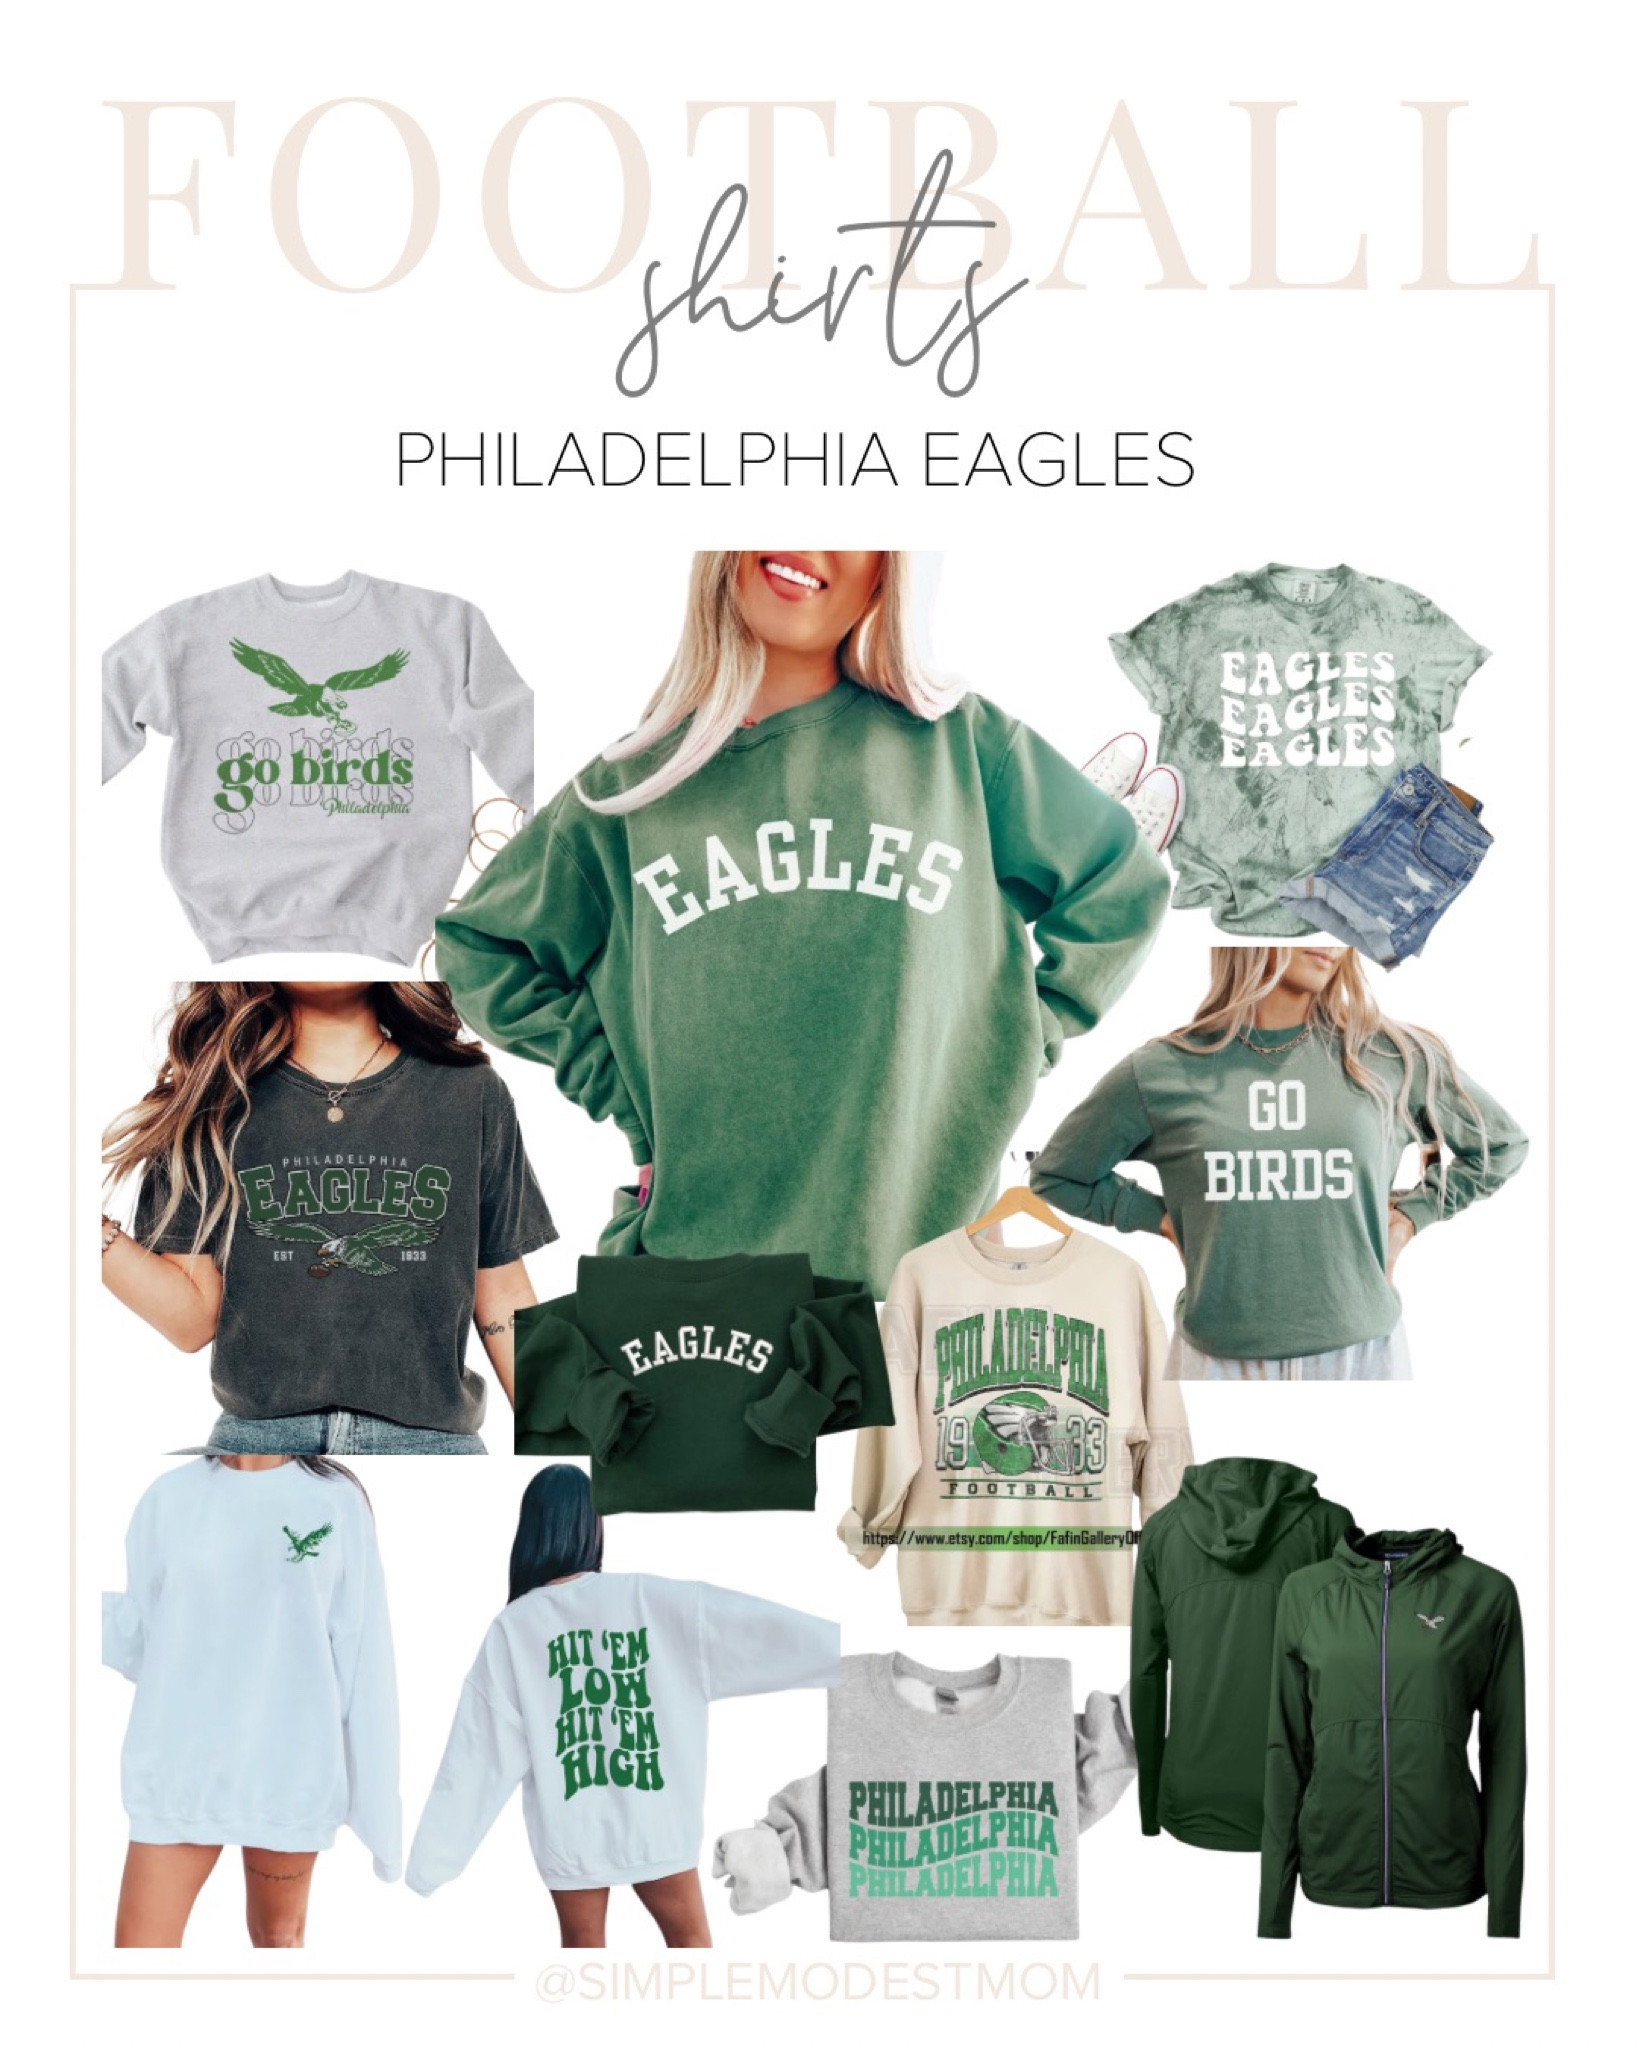 It's Philly Thing Shirt, NFL Philadelphia Eagles Shirt - Ink In Action